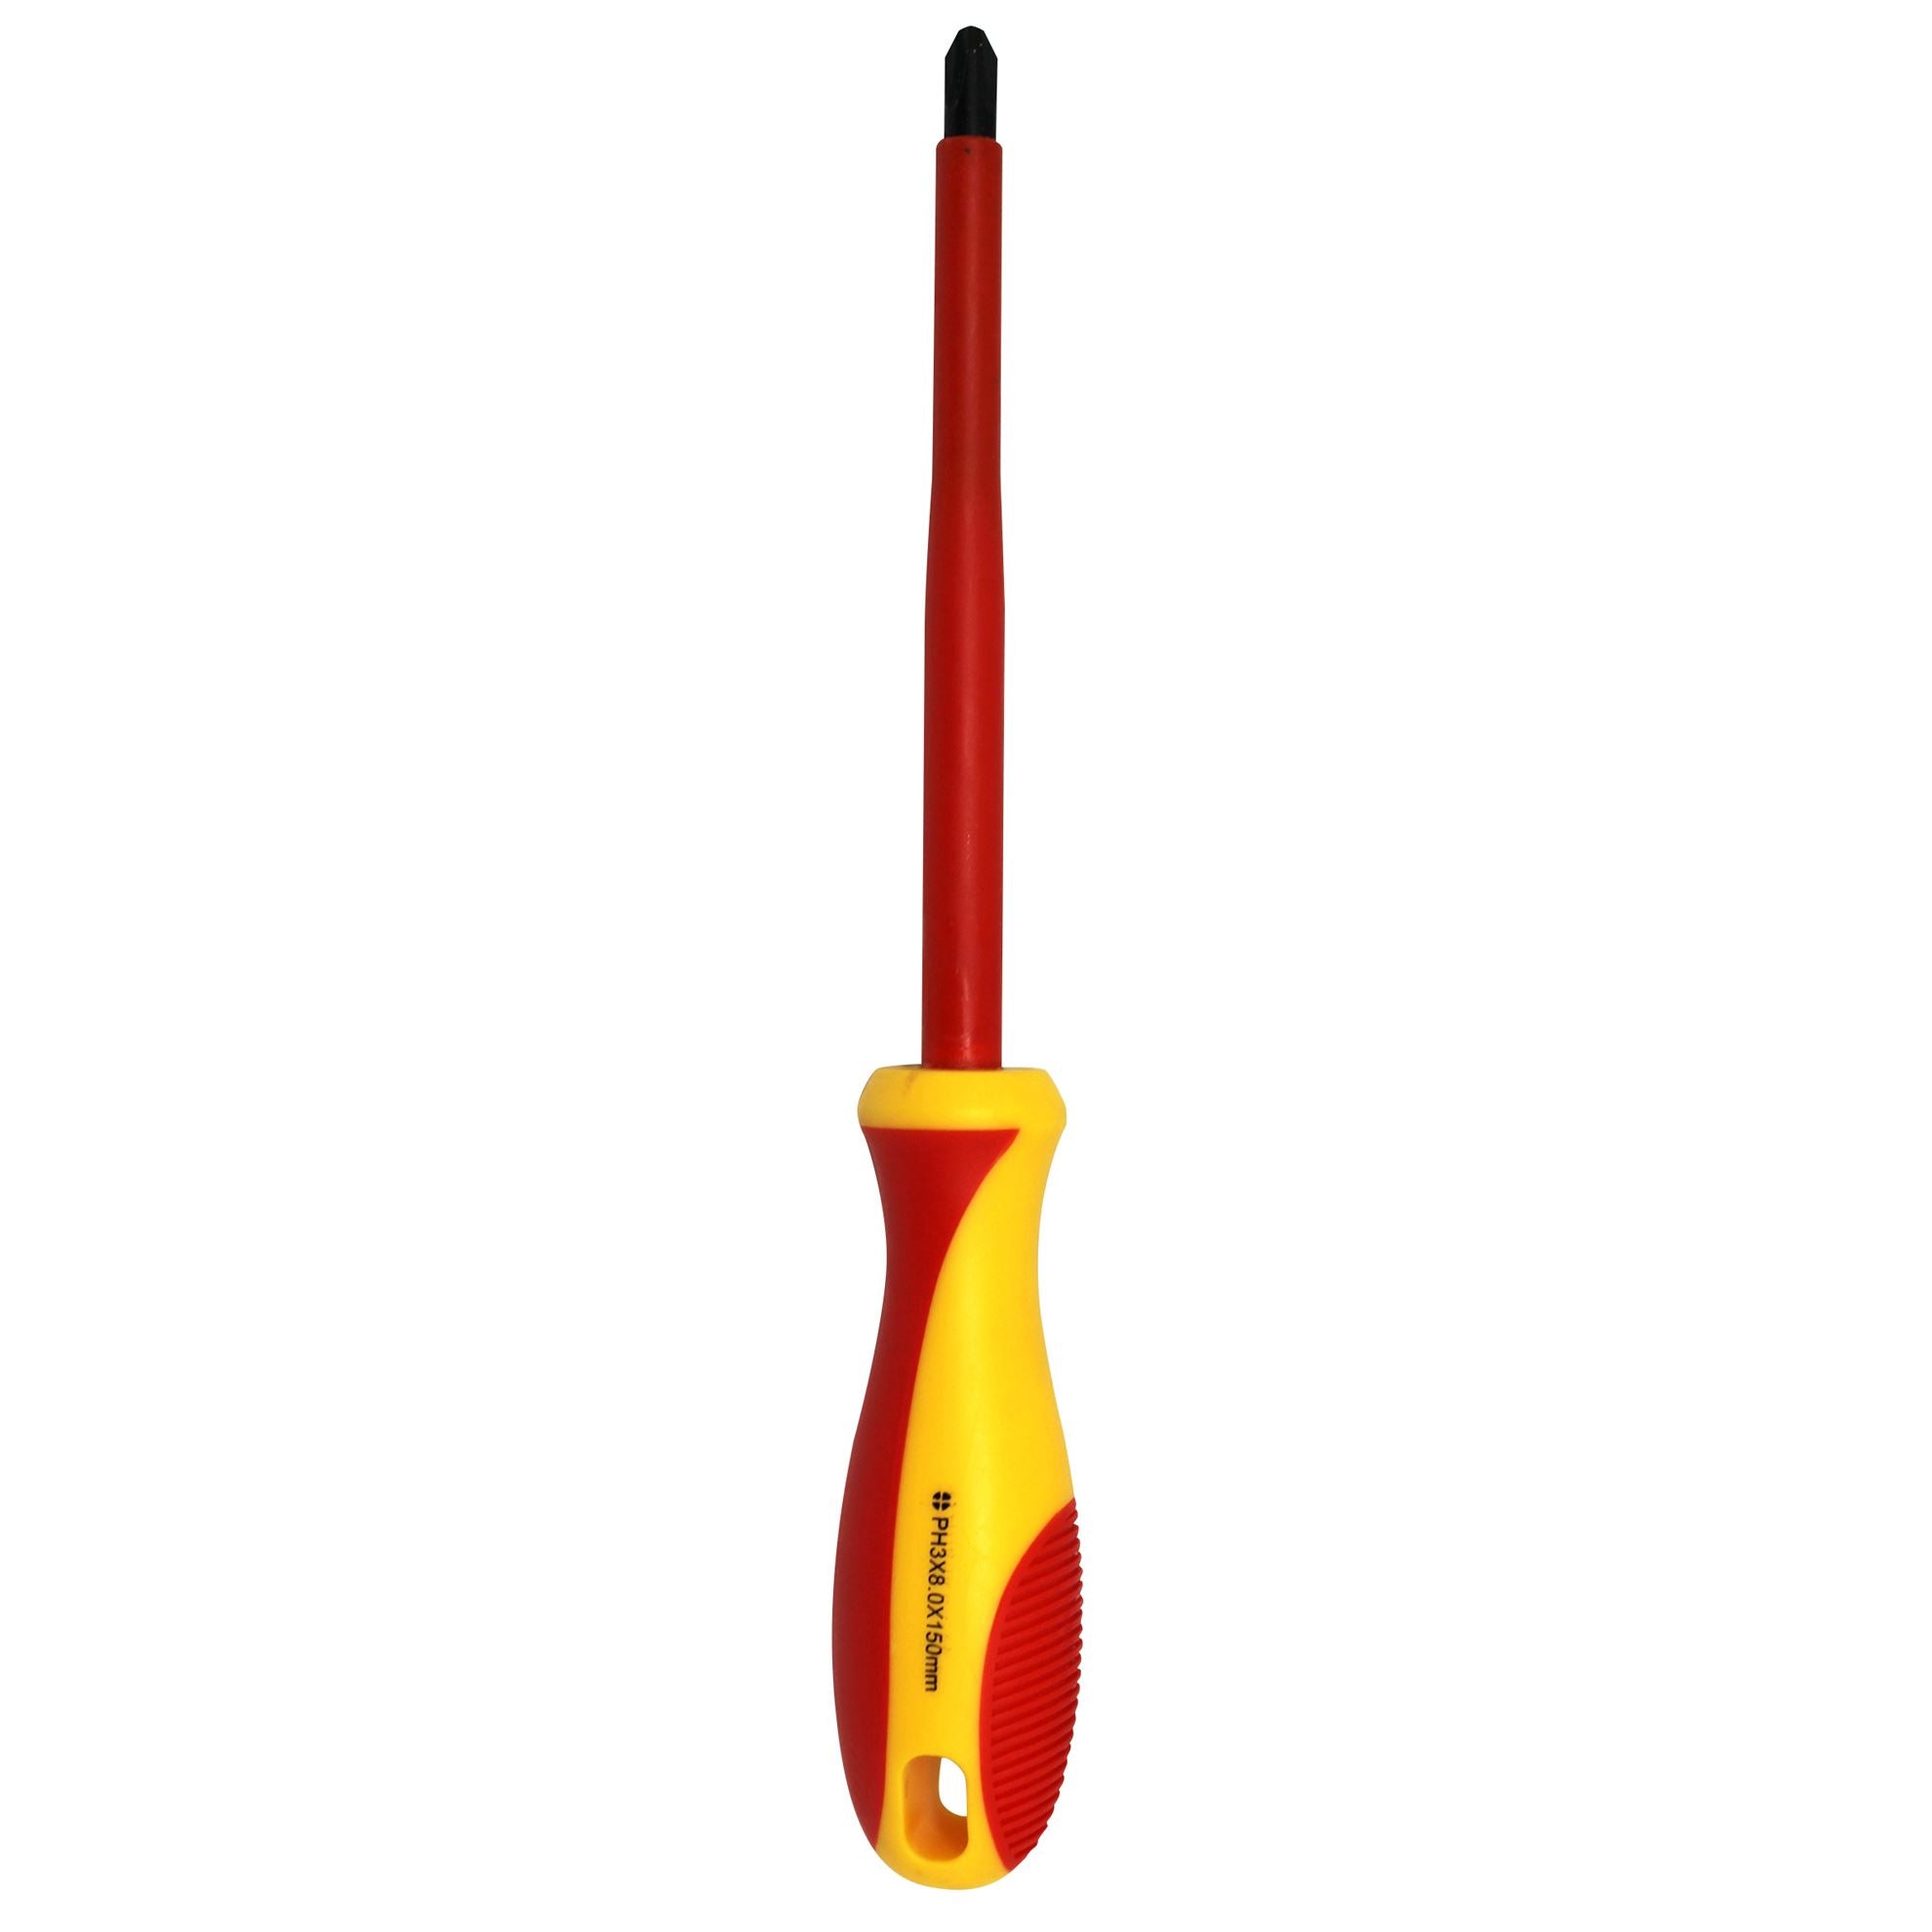 GOLDTOOL_150mm_Electrical_Insulated_VDE_Screwdriver._Tested_to_1000_Volts_AC._(PH3*150mm)._Yellow/Red_Colour_Handle